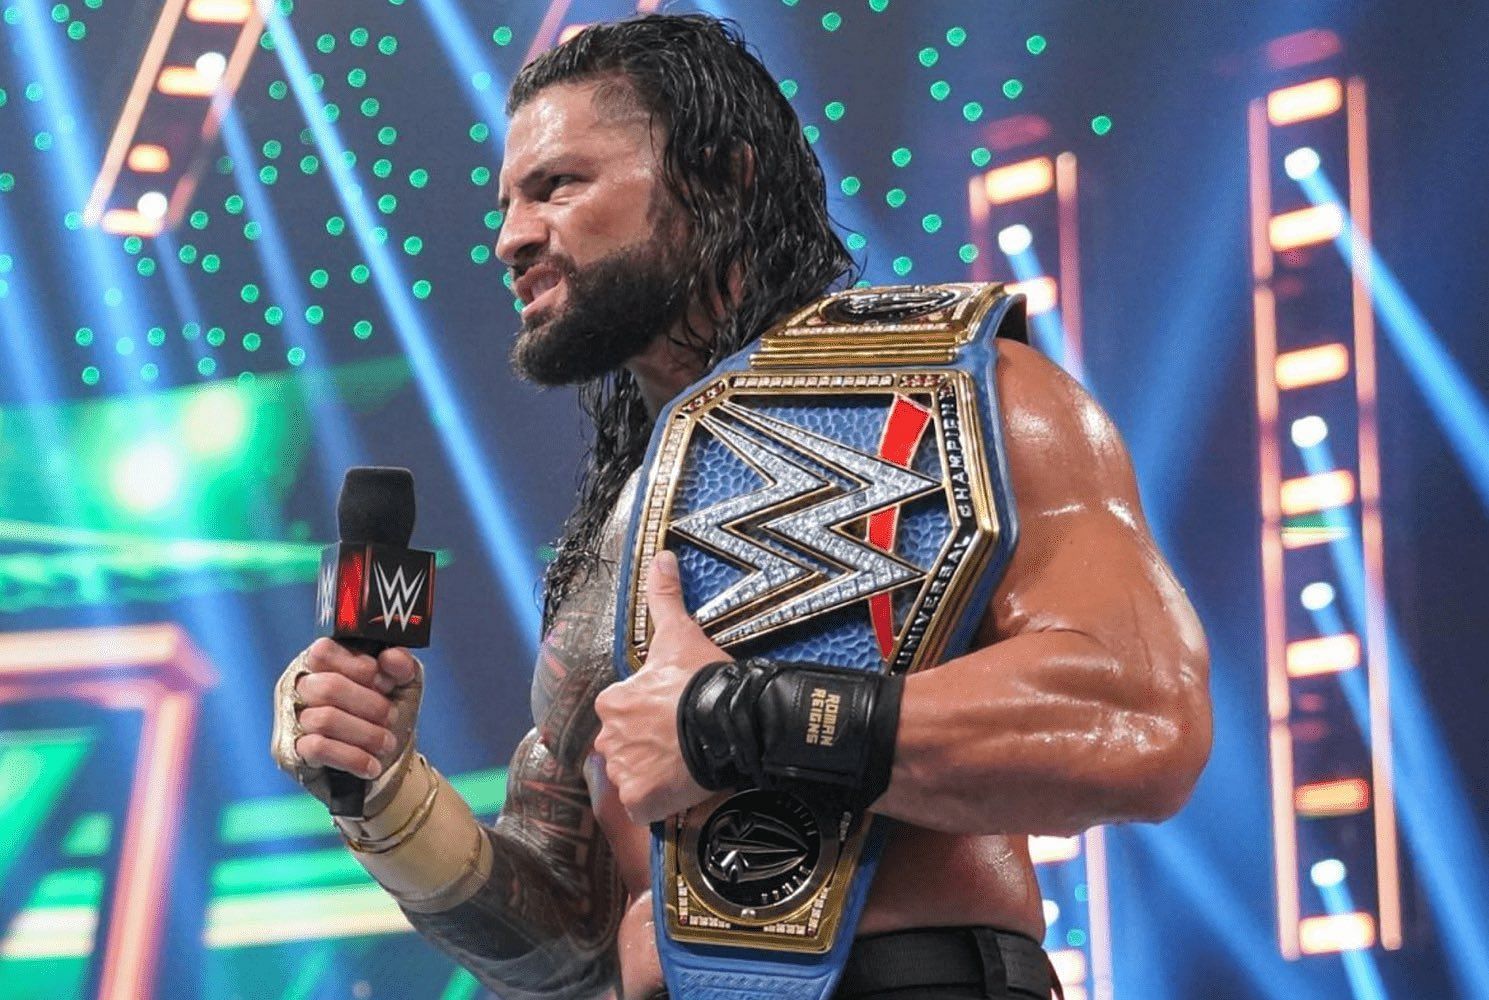 Roman Reigns could have another dominant year in 2022